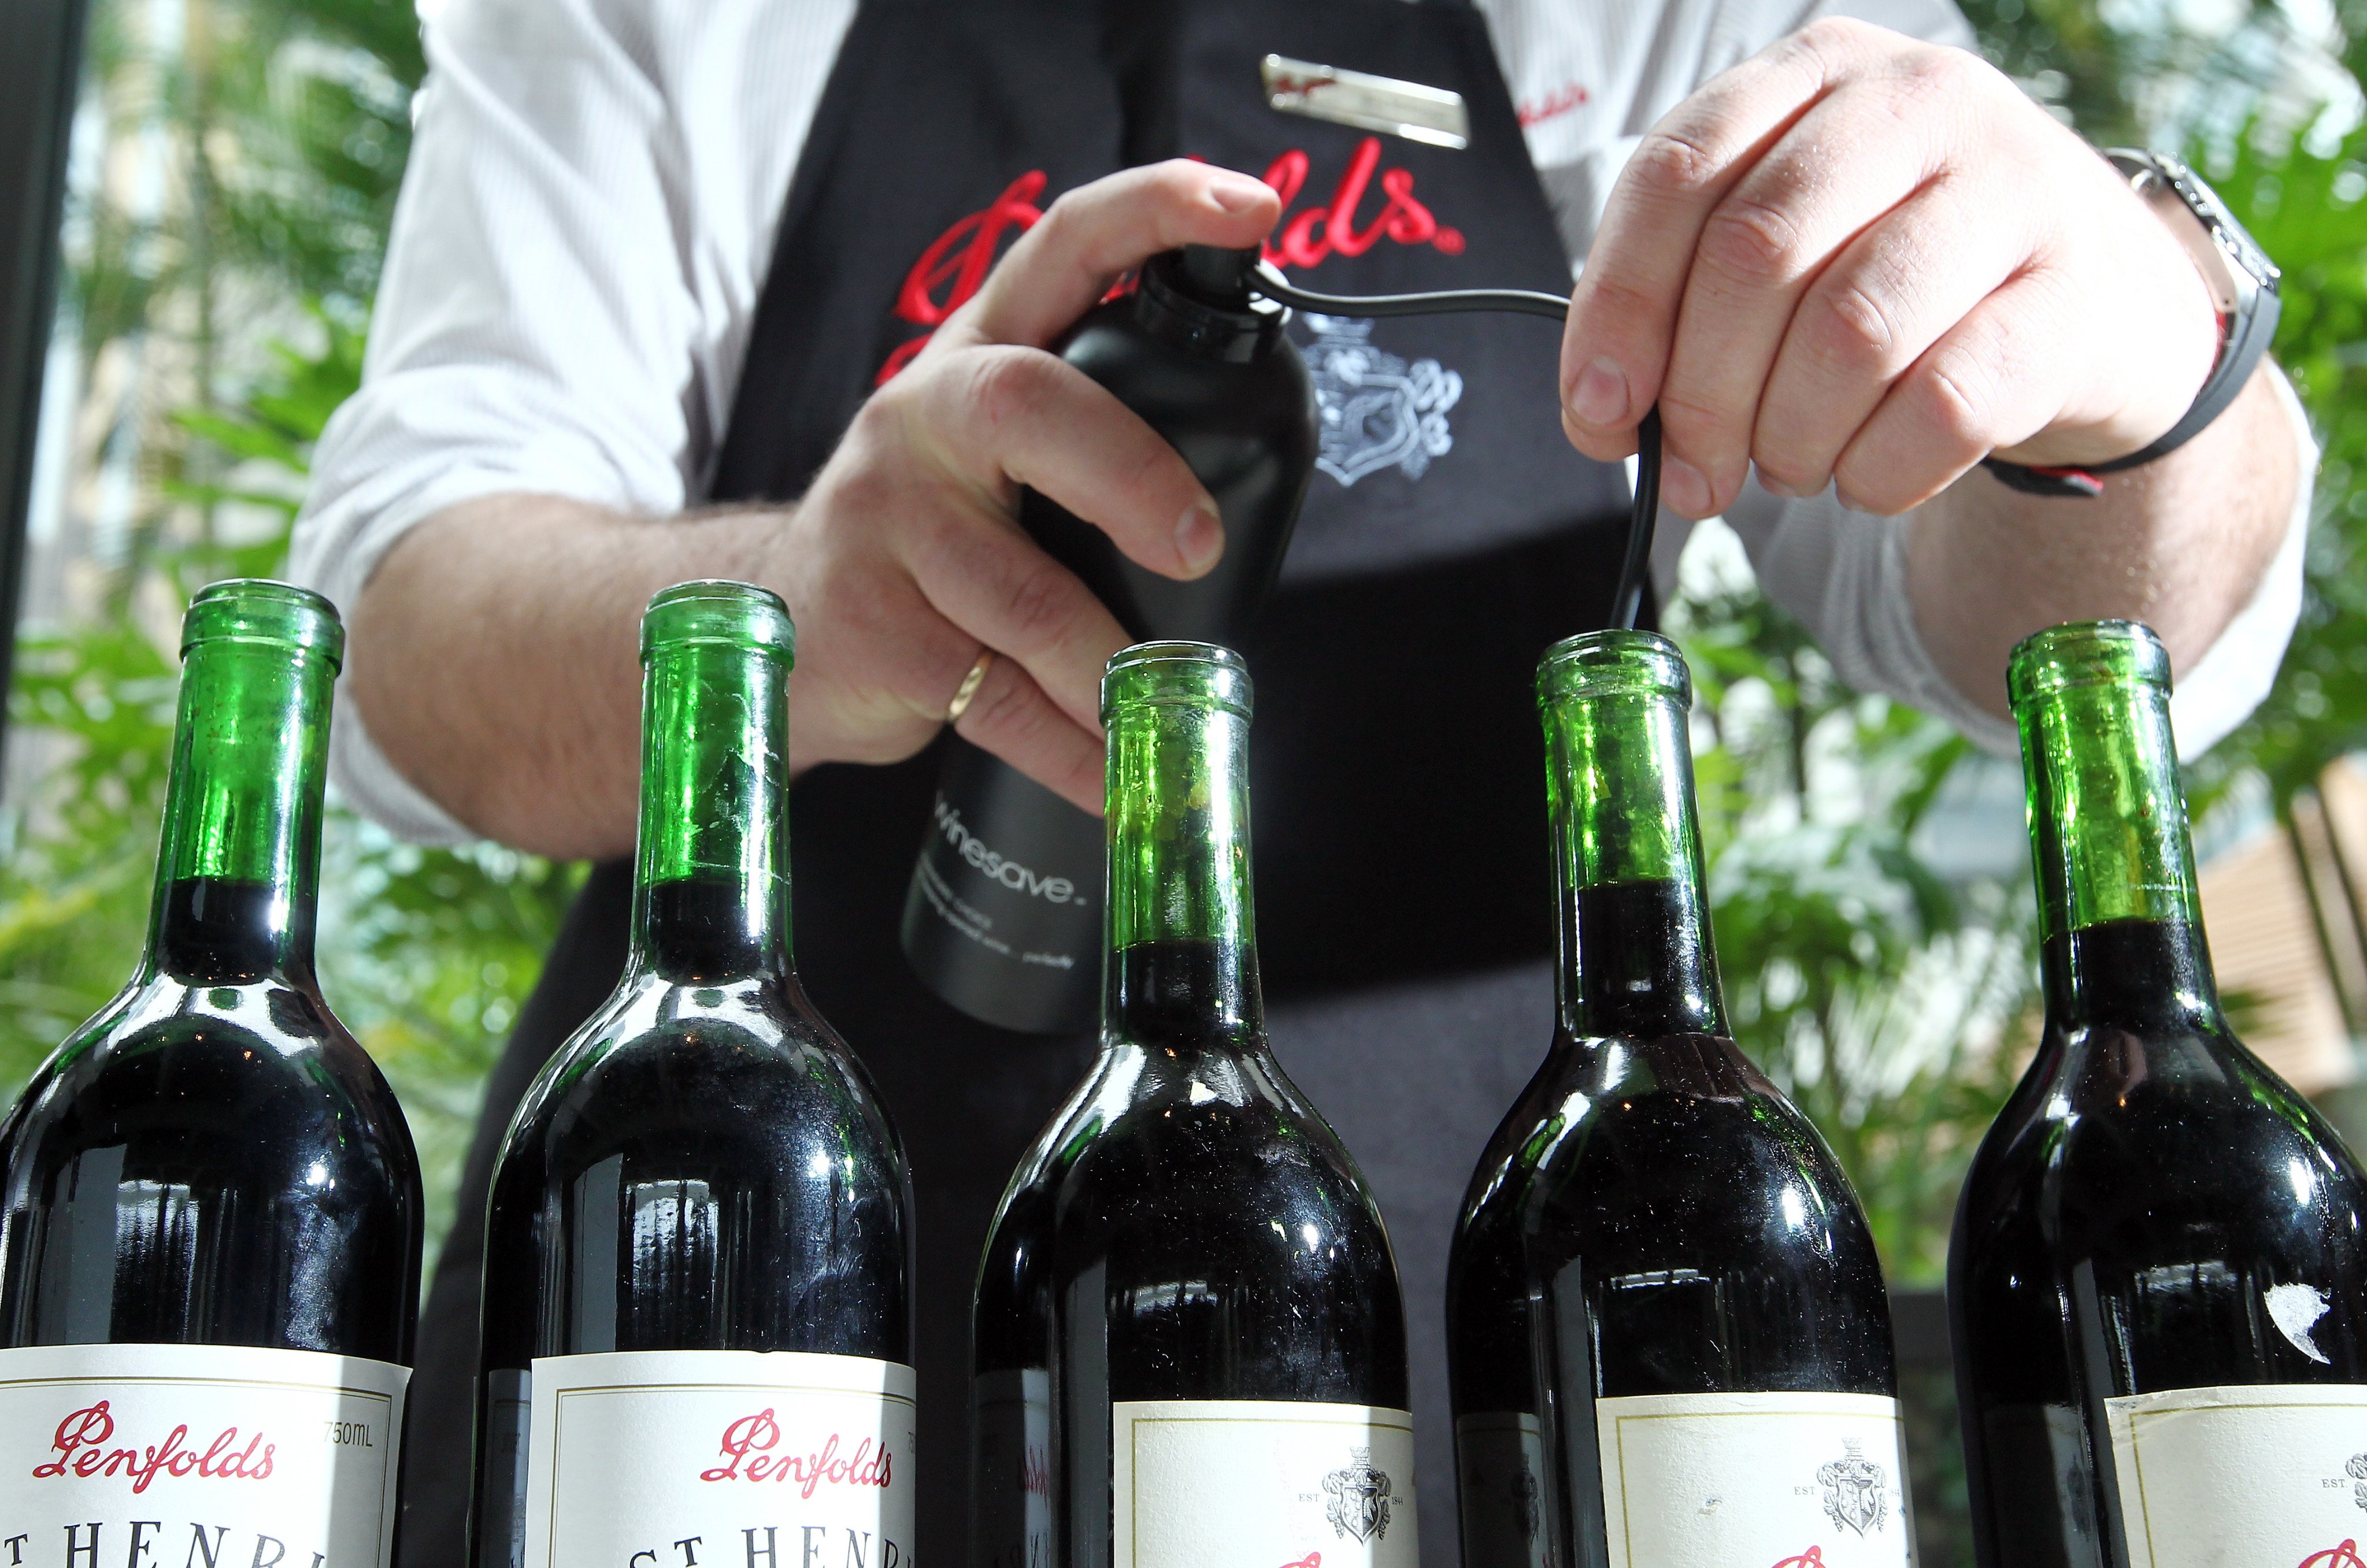 The Chinese market accounted for about 30 per cent of Treasury Wine Estates’ earnings prior to the implementation of levies in March 2021. Photo: SCMP